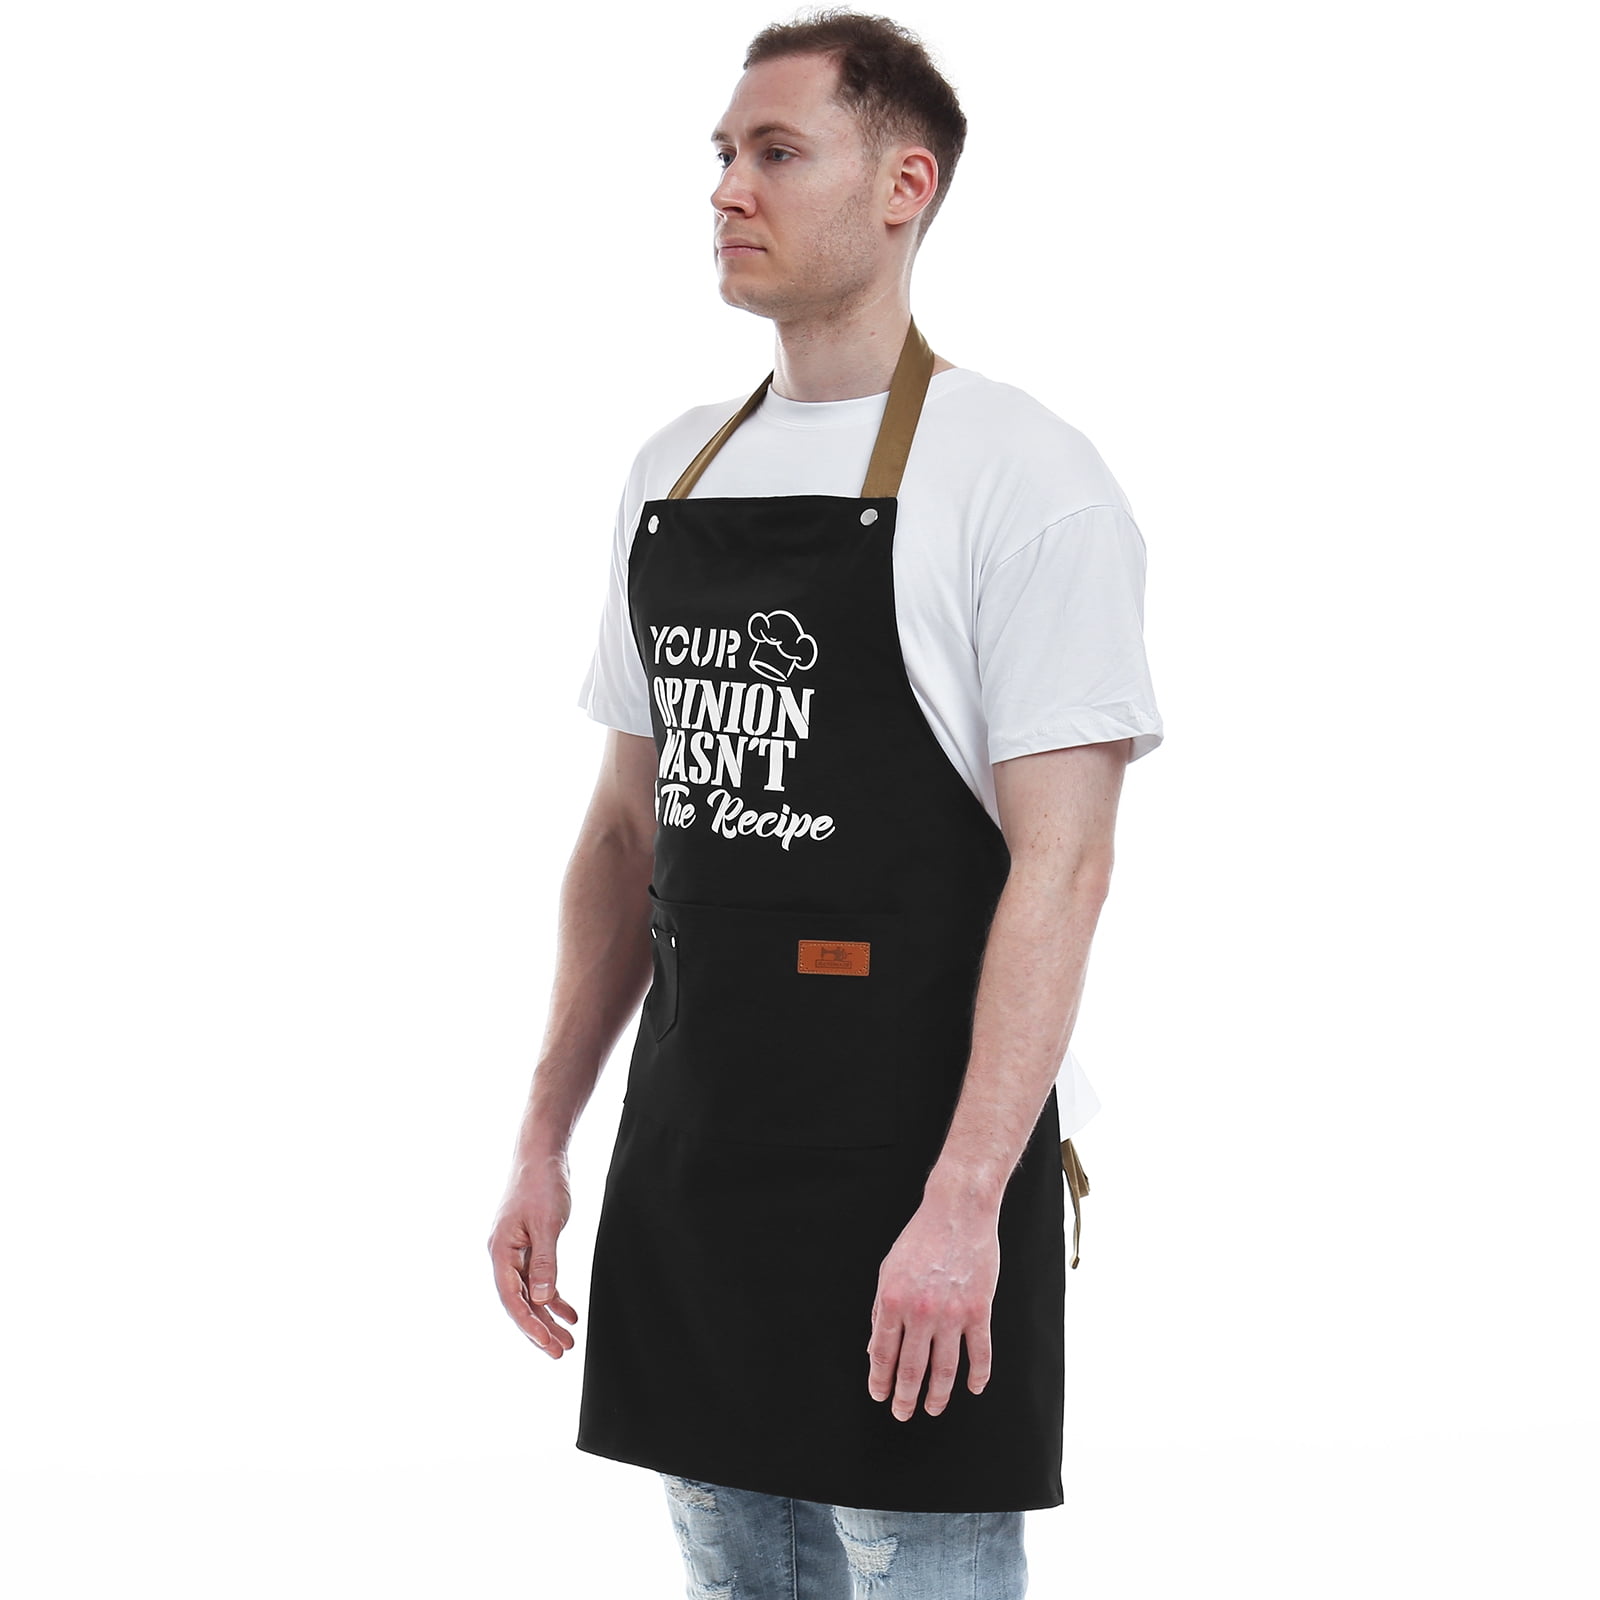  Miracu Funny Apron for Men, Cooking Aprons for Women -  Valentines Day, Birthday Chef Gifts for Men Dad Boyfriend Husband Mom Wife  Baker Her - Fun BBQ Grilling Baking Apron, Grill